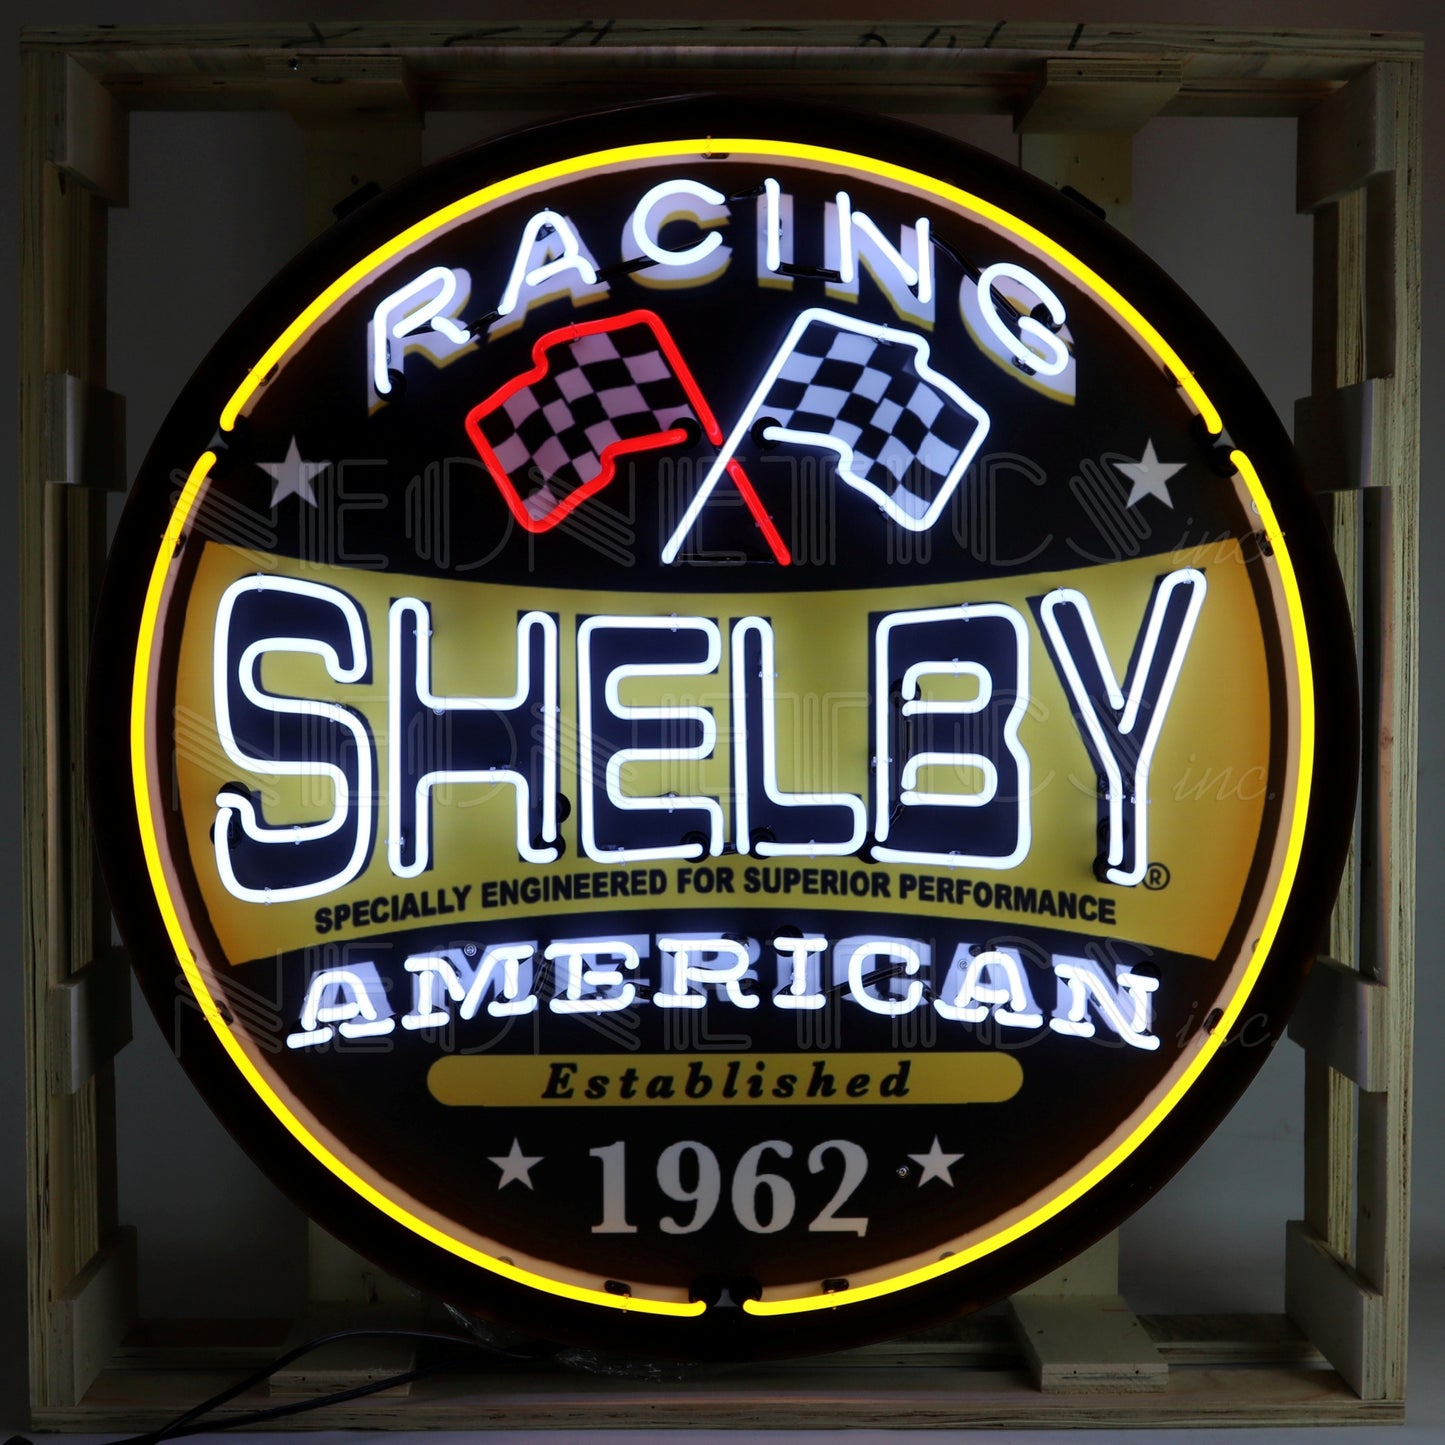 Shelby Racing Neon Sign in Steel Can, 36 inches wide and high with iconic racing insignia.